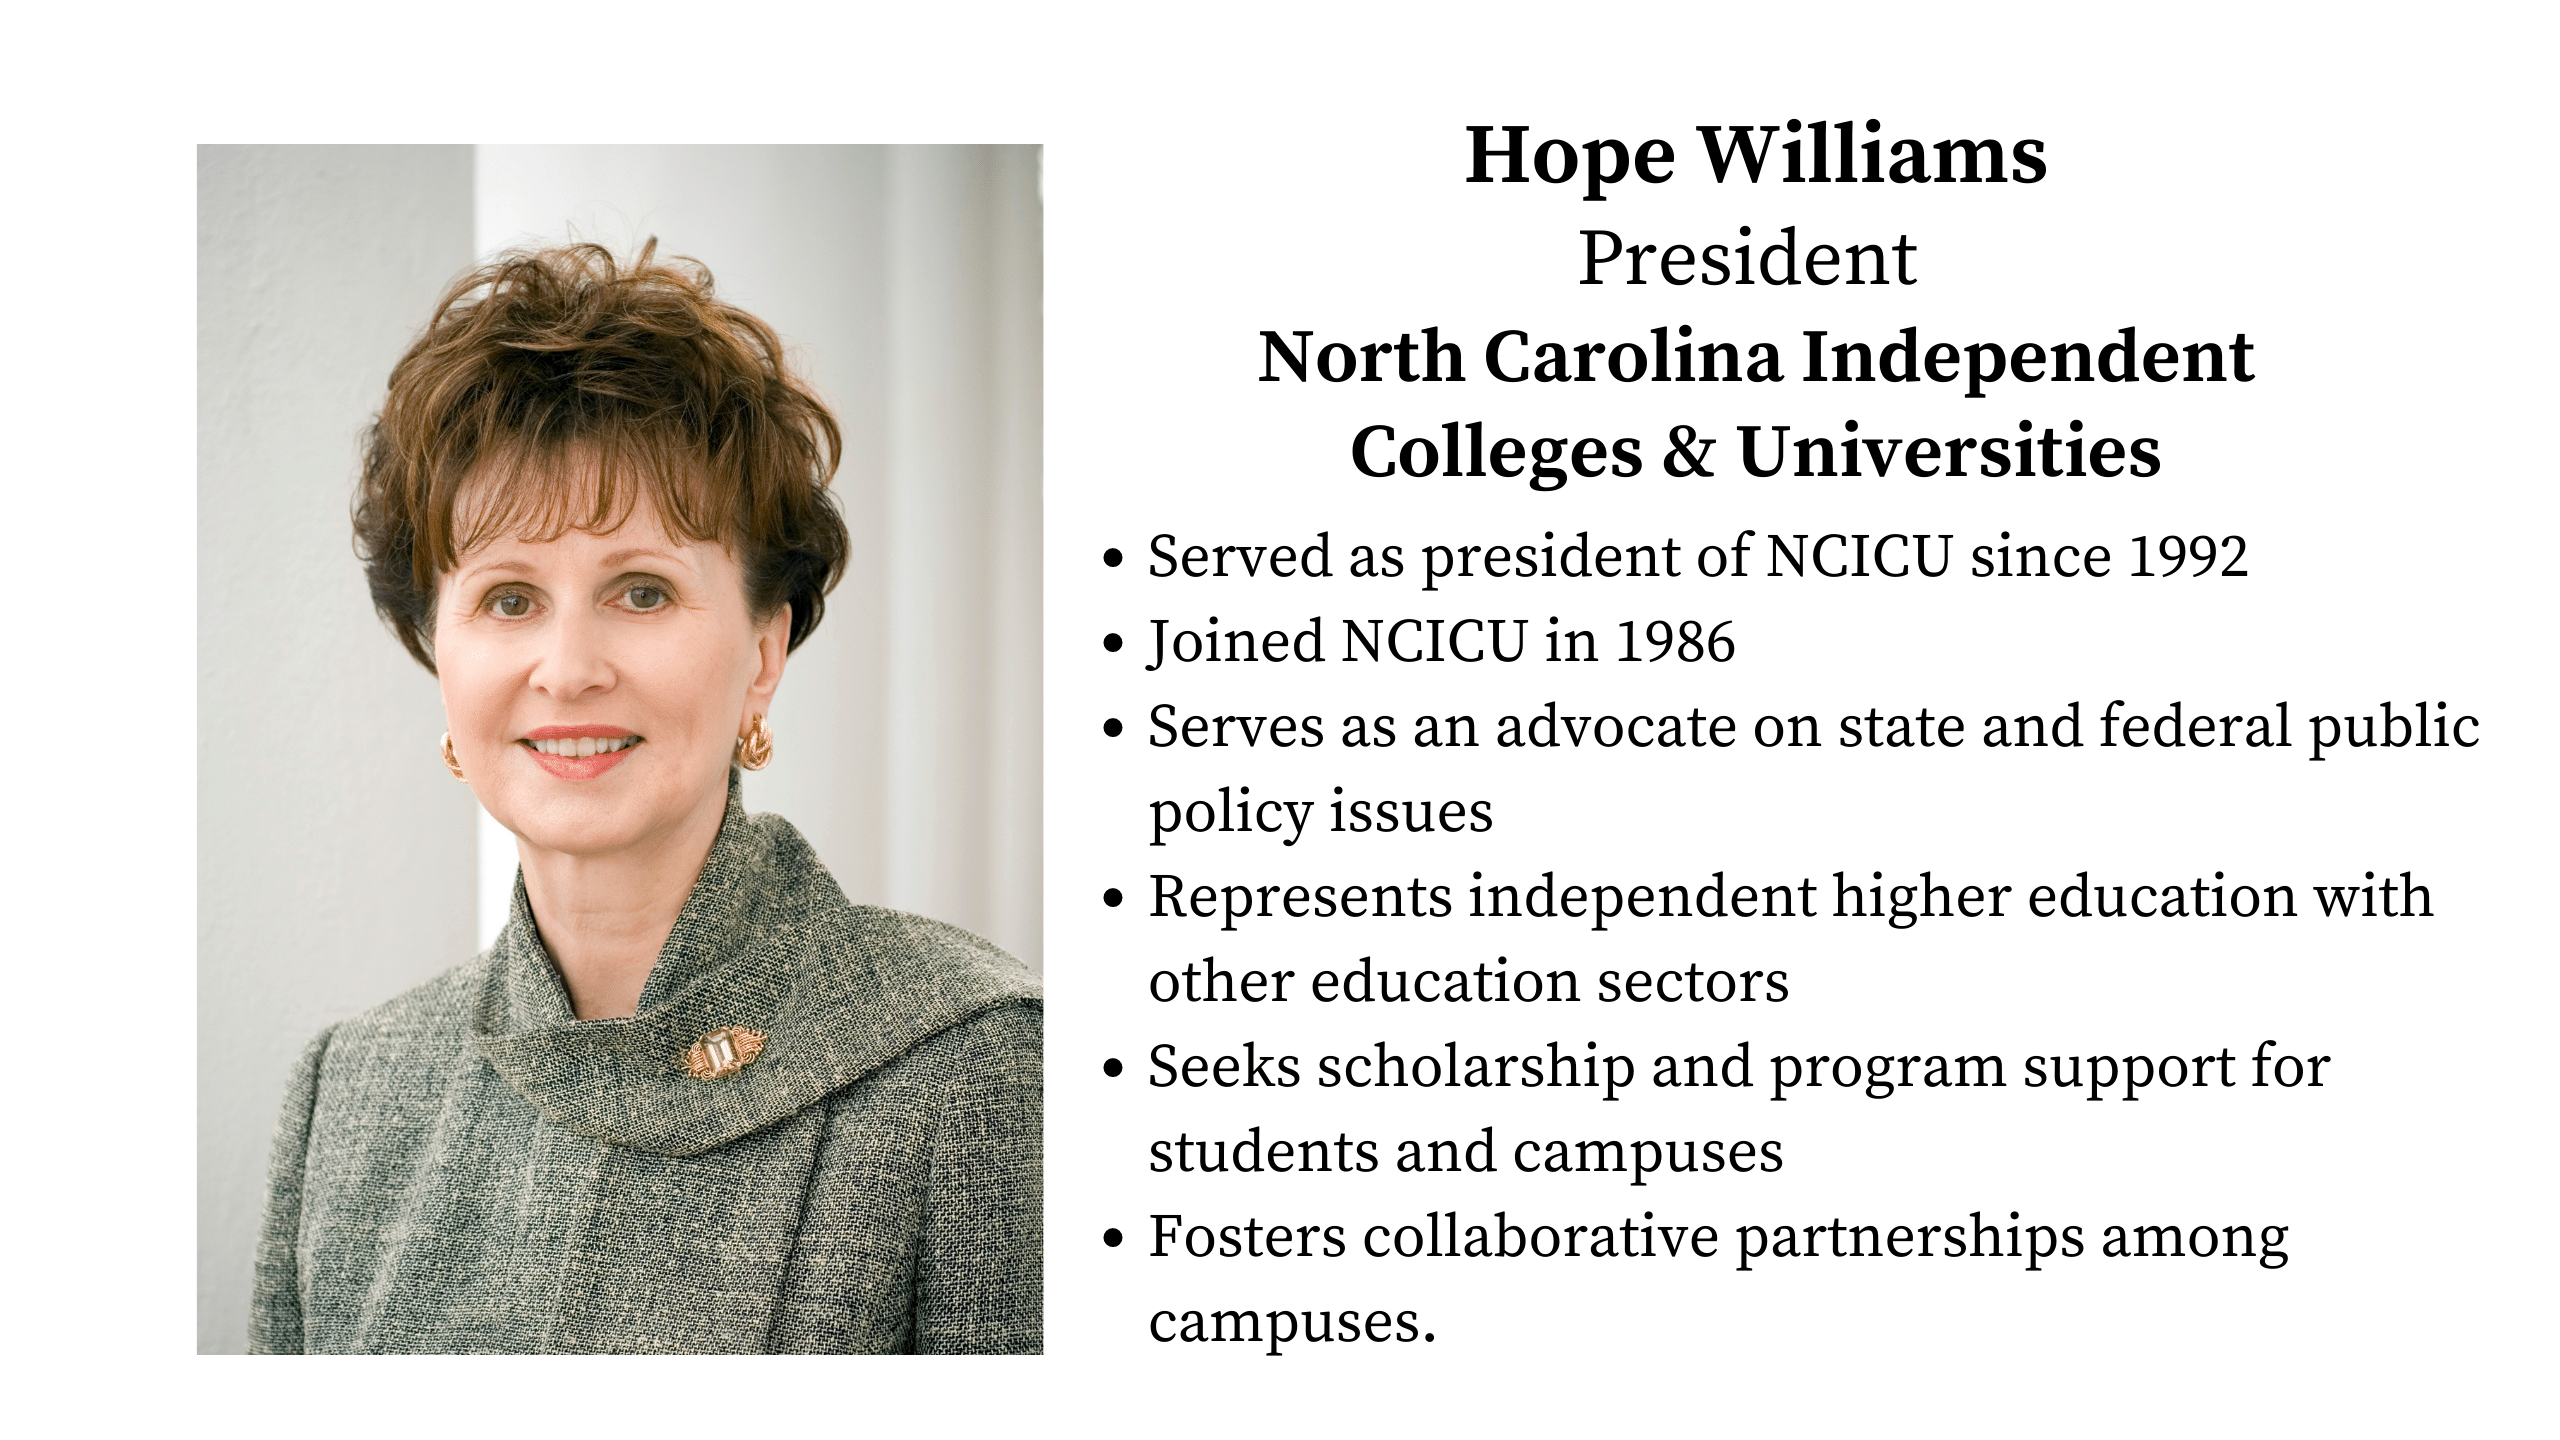 Q&A with Hope Williams, President of the North Carolina Independent Colleges and Universities